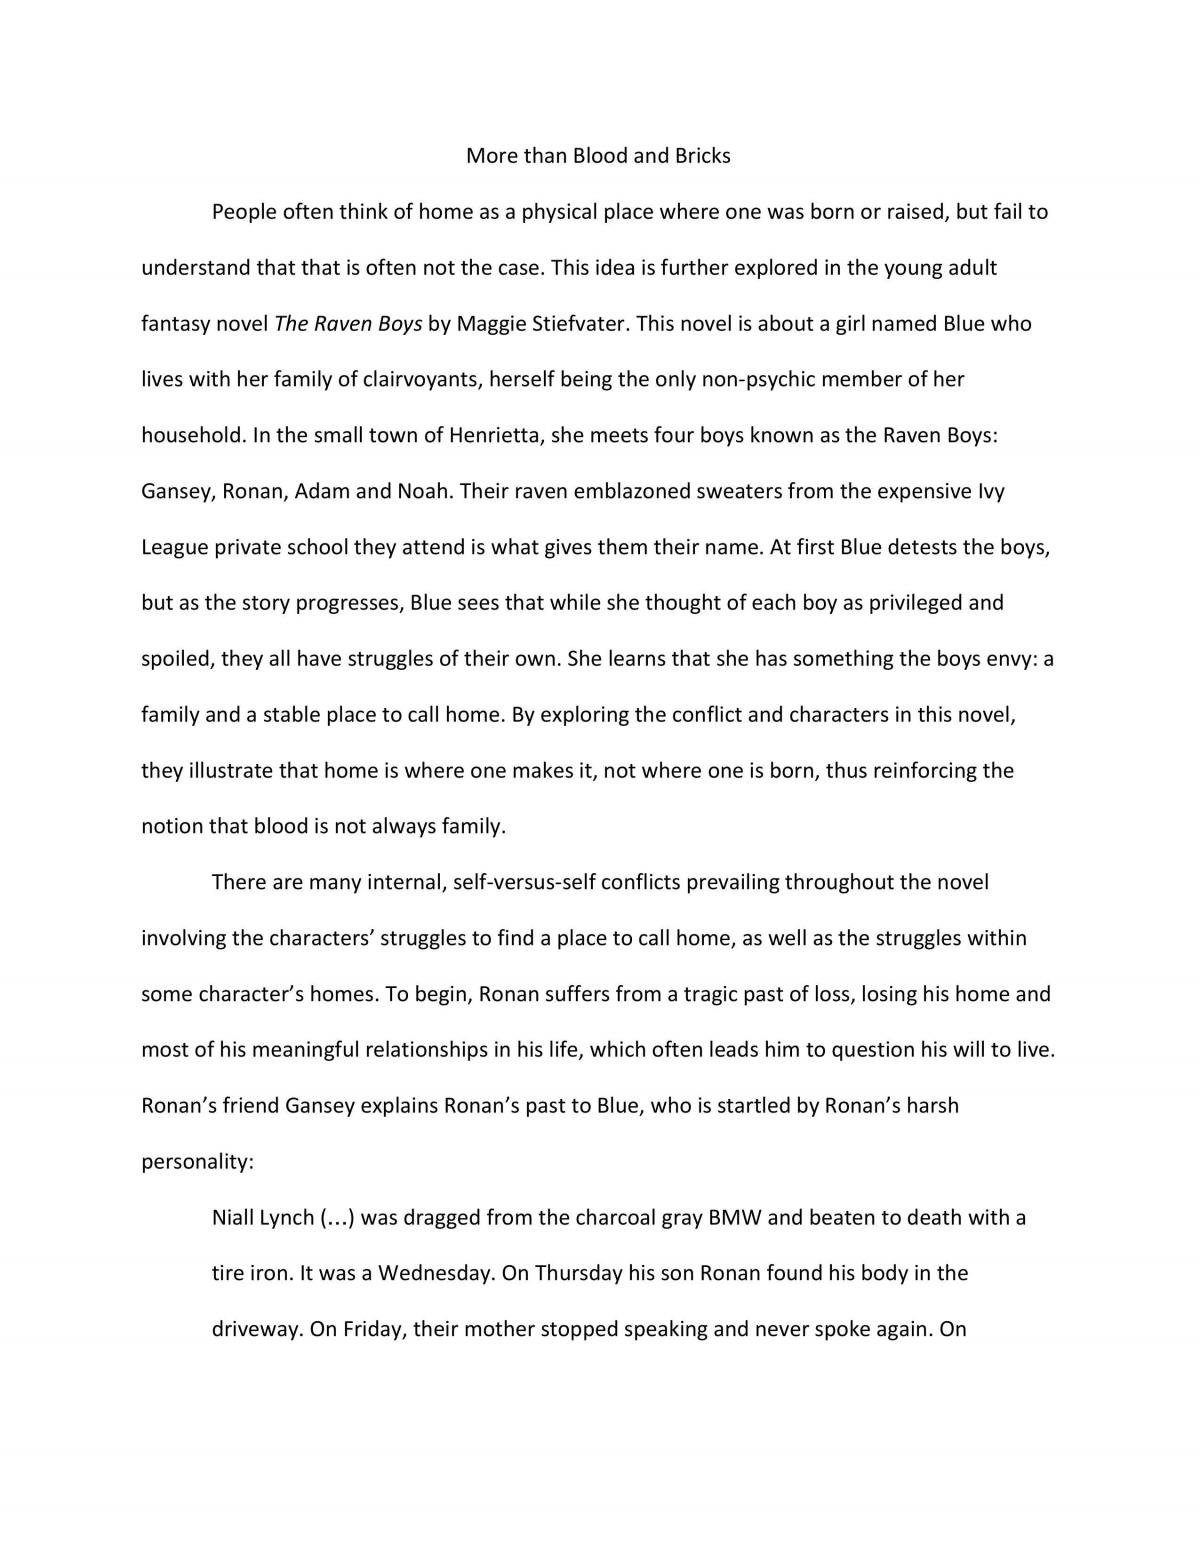 Essay Discussing the Theme of Home in the Novel 